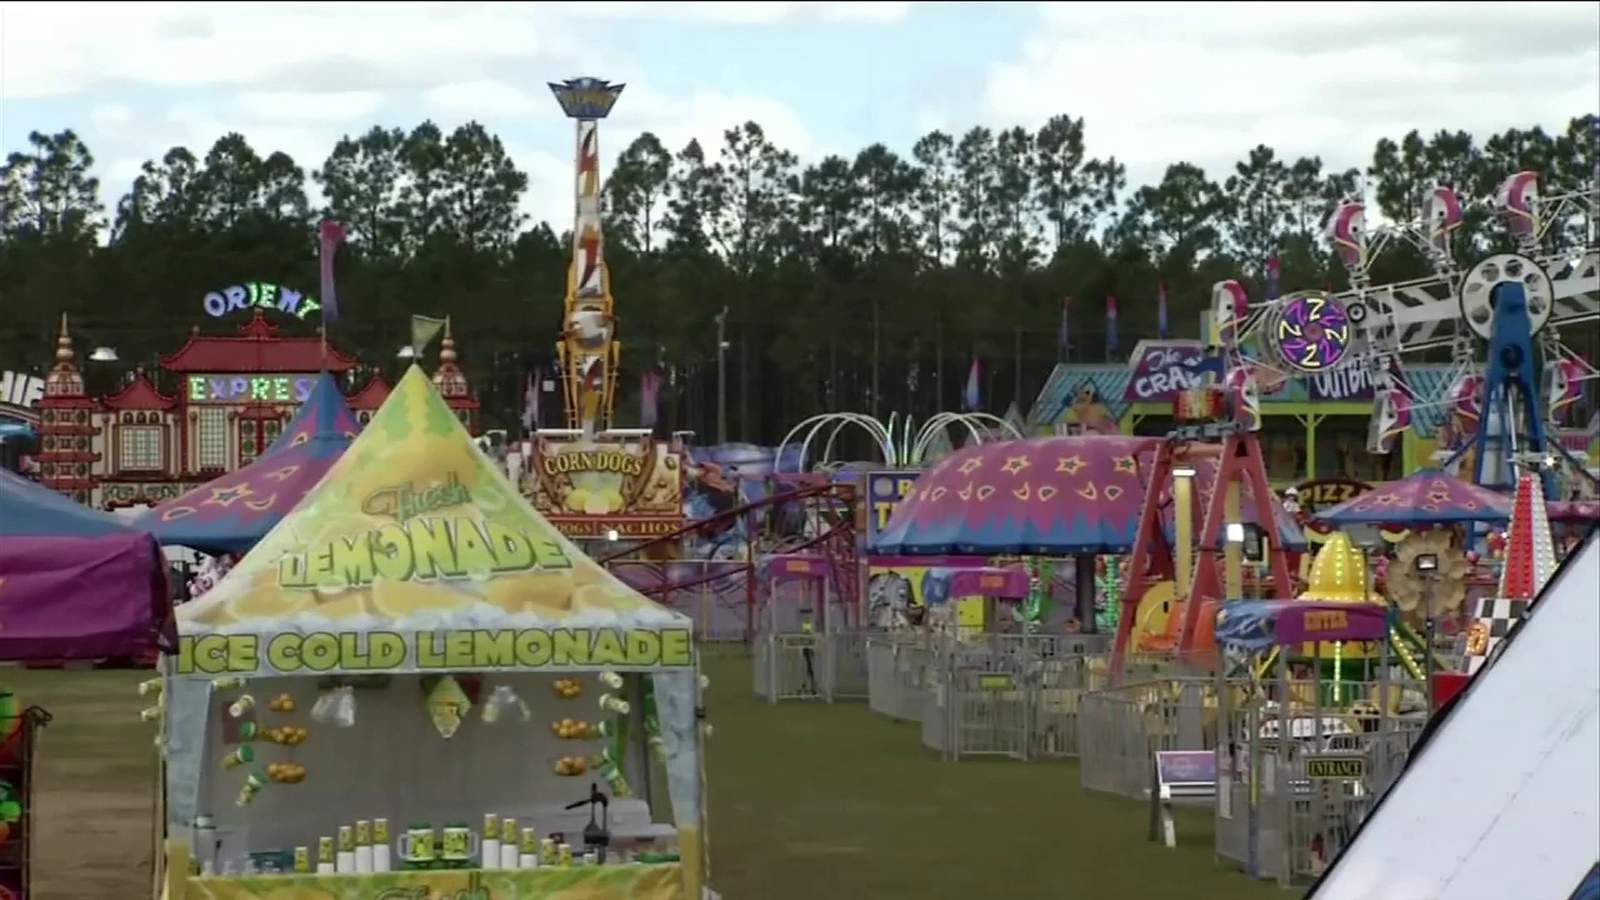 Modified version of popular annual fair coming to Clay County in September